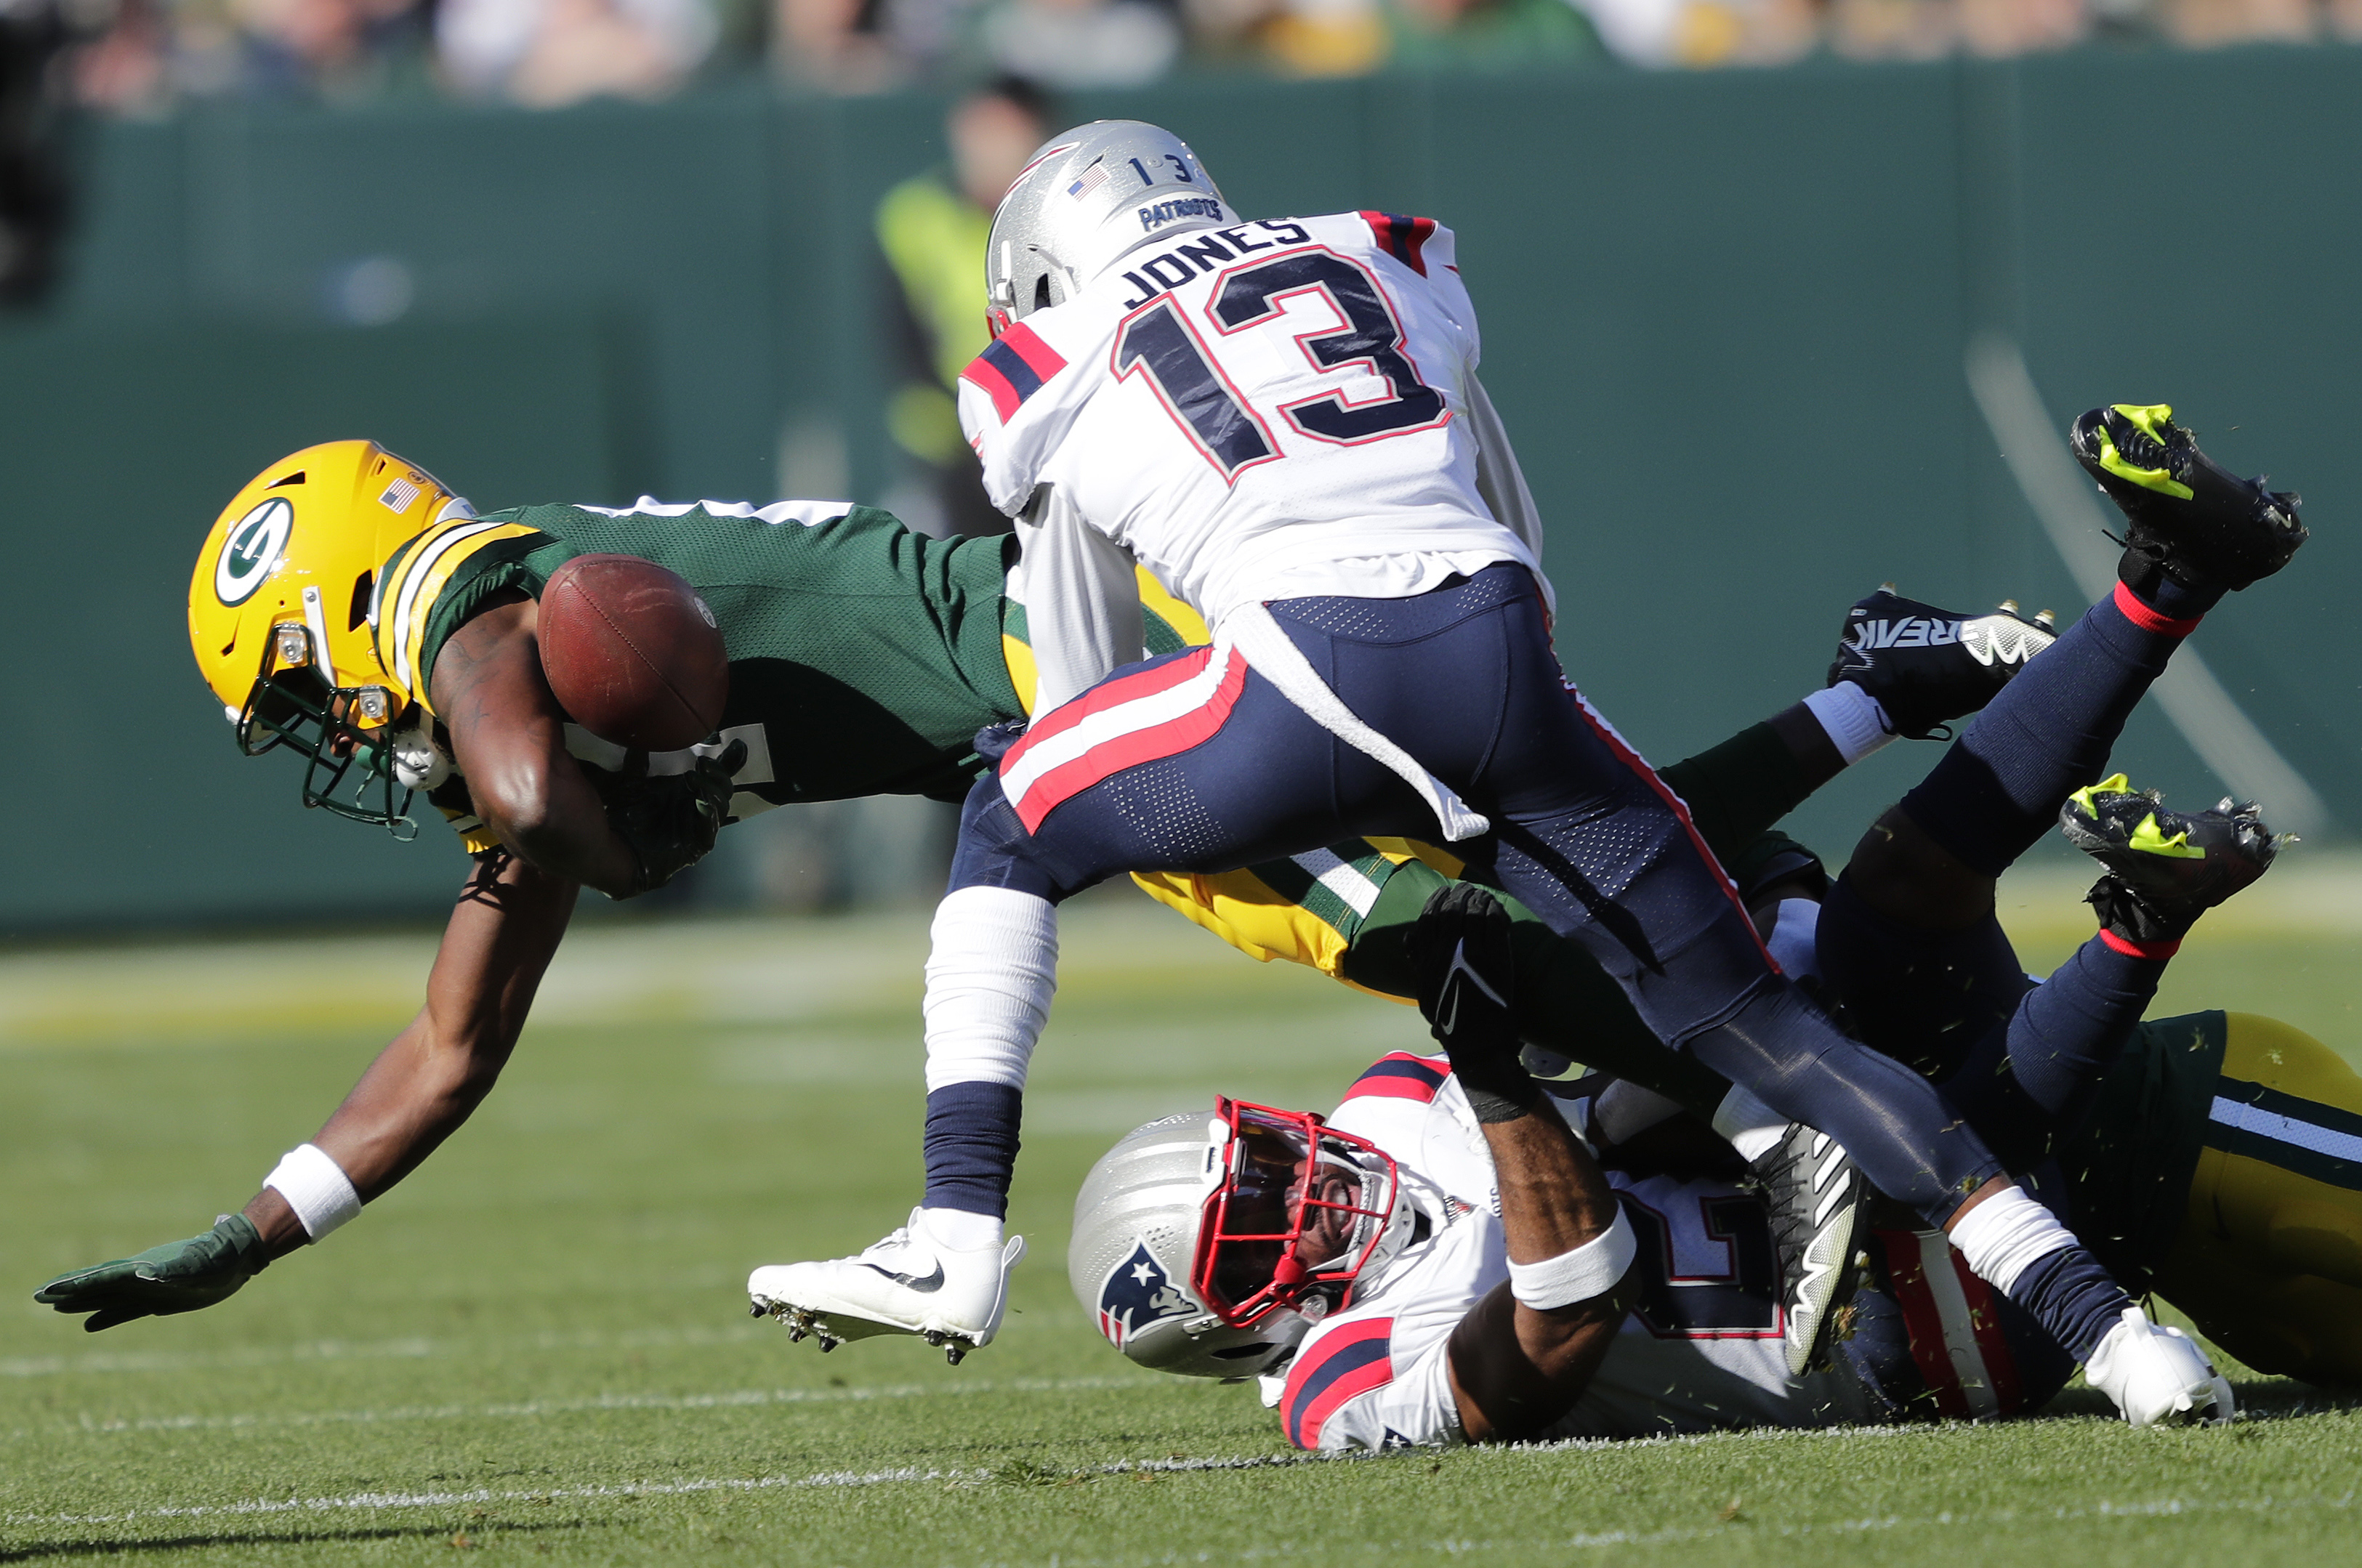 Undermanned, Underdog Patriots Force Overtime But Fall to Packers